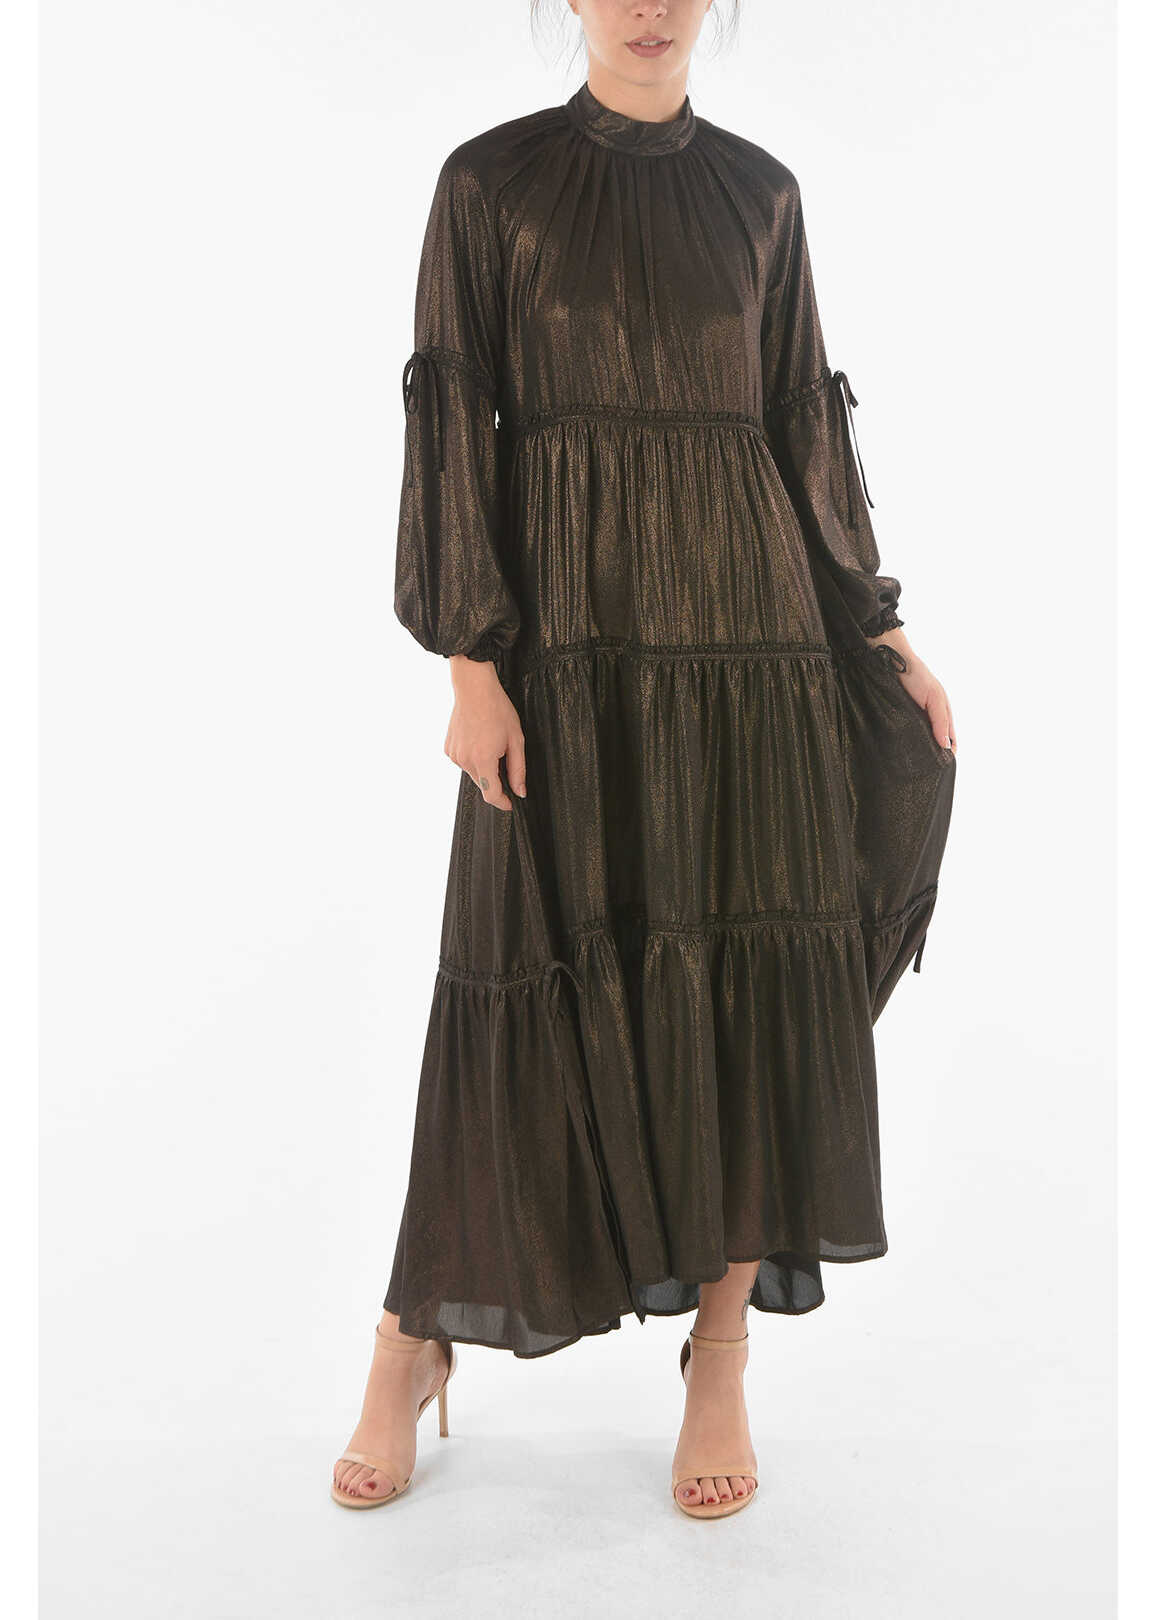 AllSaints Lurex Eimear Maxi Dress With Bishop Sleeves Brown image0